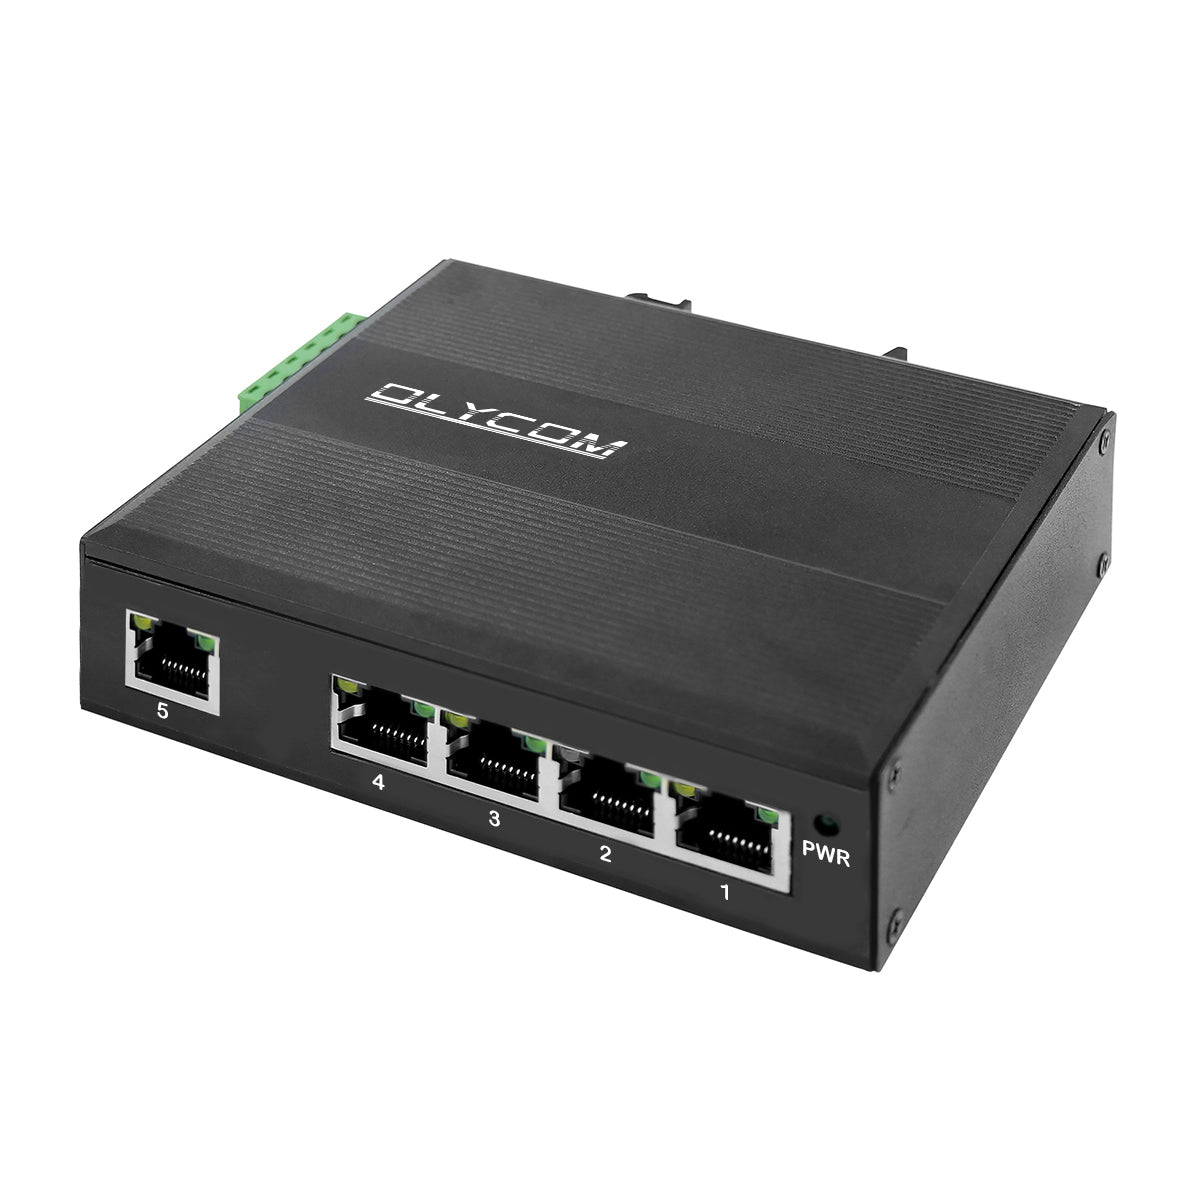 10/100/1000Mbps Industrial Network Switch（5UTP)